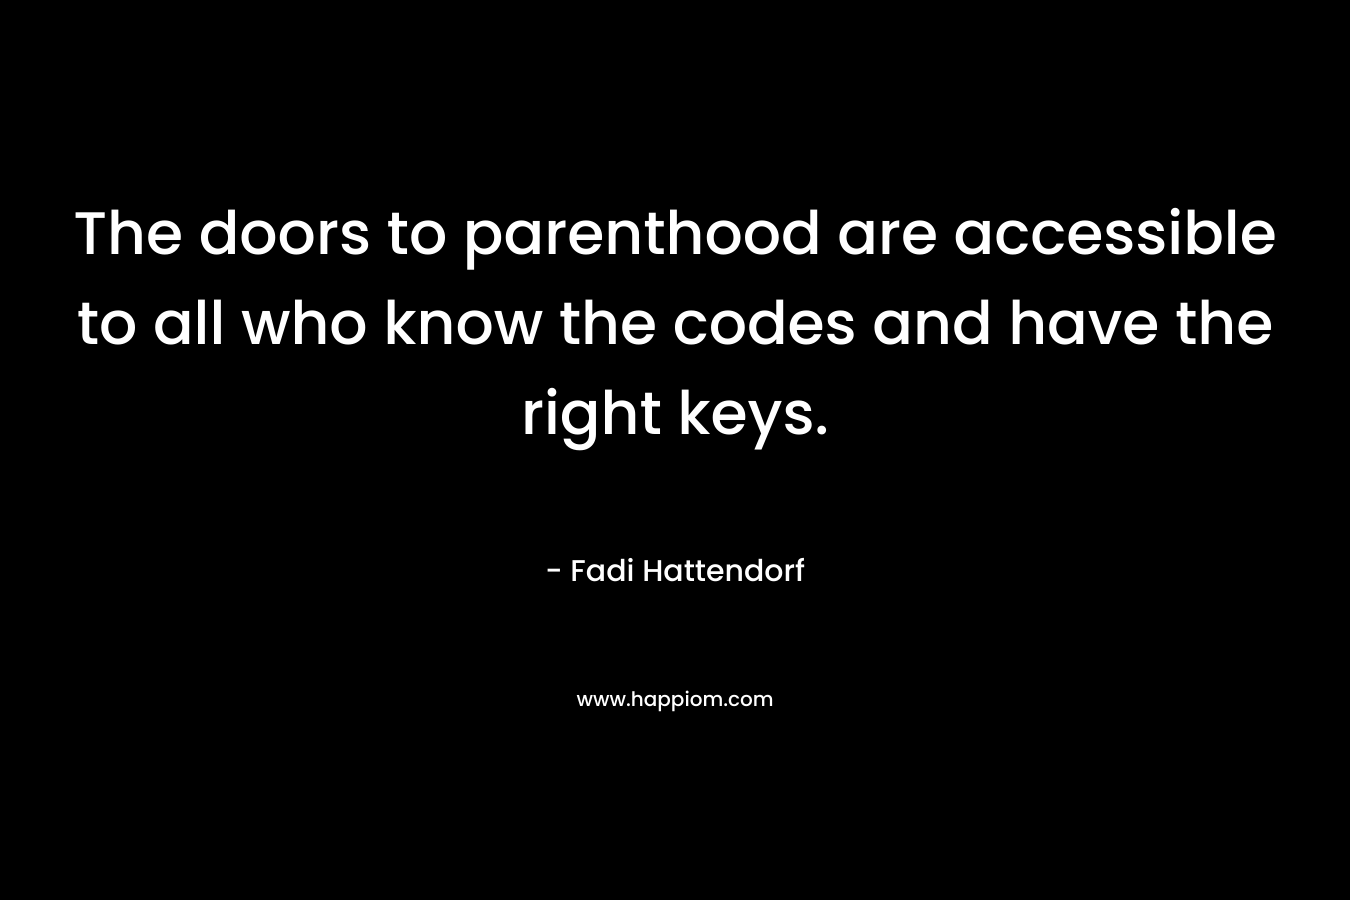 The doors to parenthood are accessible to all who know the codes and have the right keys. – Fadi Hattendorf